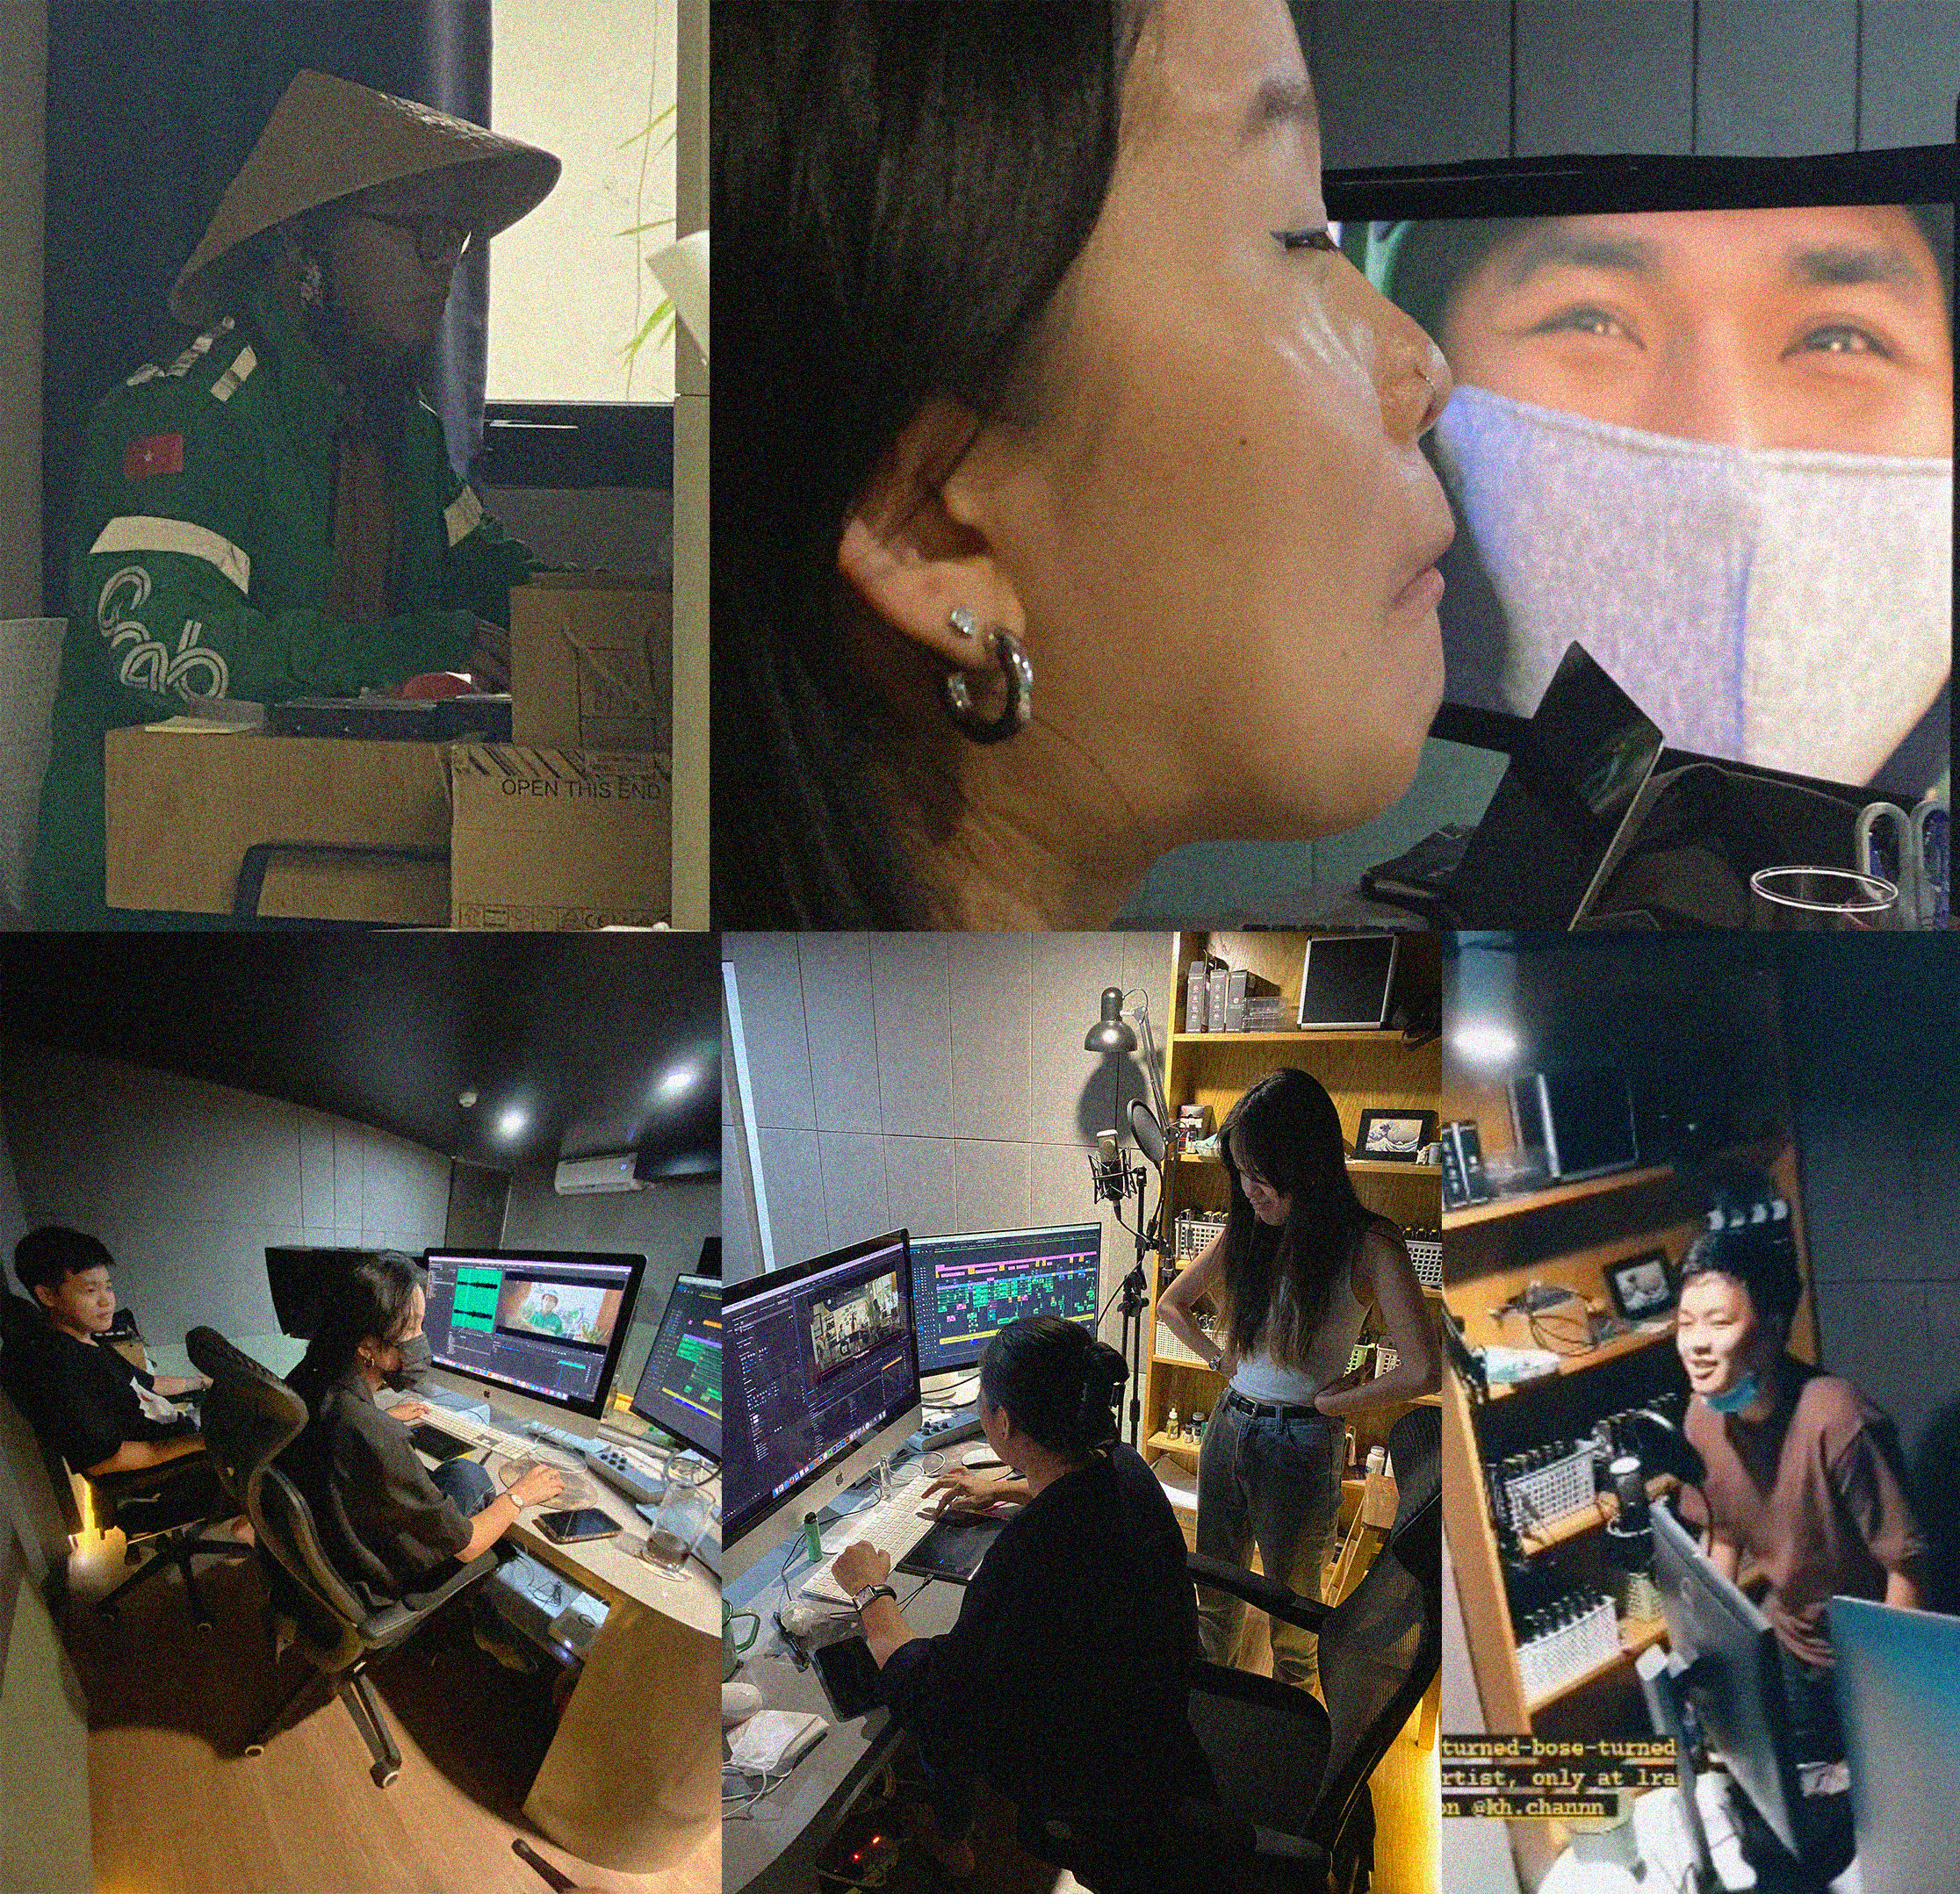  Post team, getting personal with the project.  At one point, the Creative Director also decided to edit the video for us too.  And Khanh continue to add his footprint to Grab projects by doing VO dubbing for some roles. 